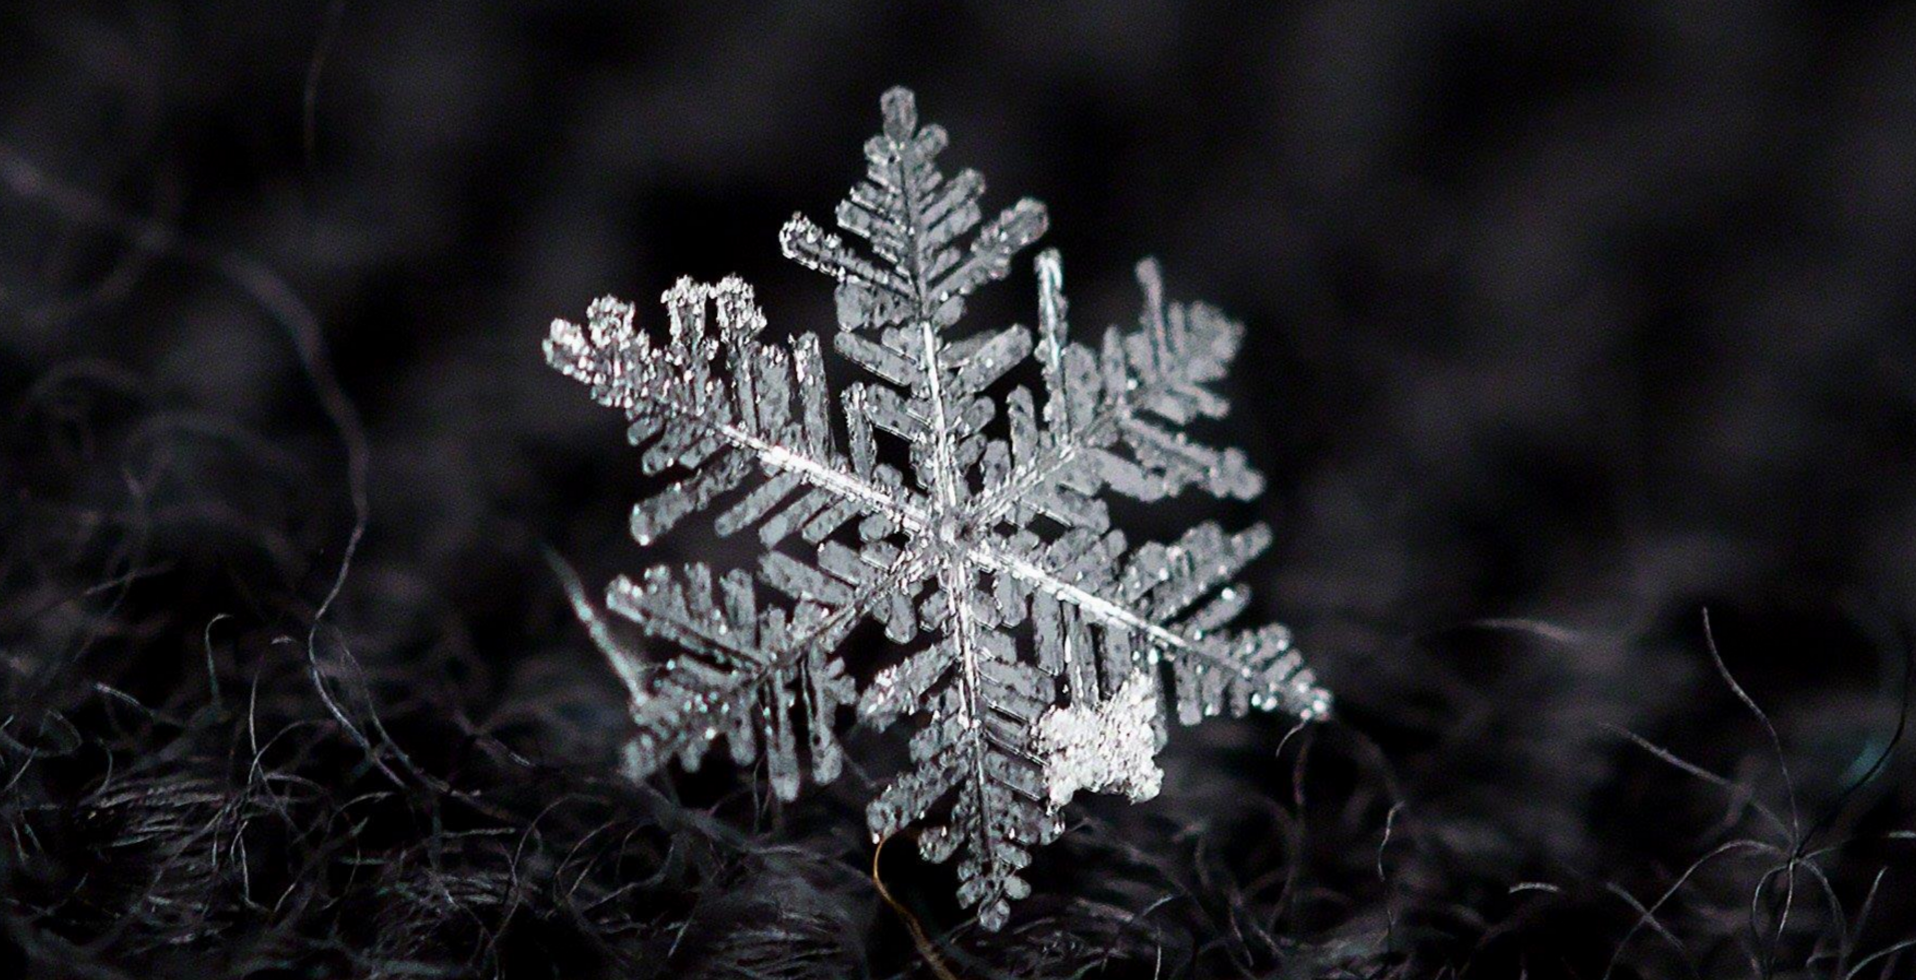  A snowflake as photographed by Robert  Raia.  